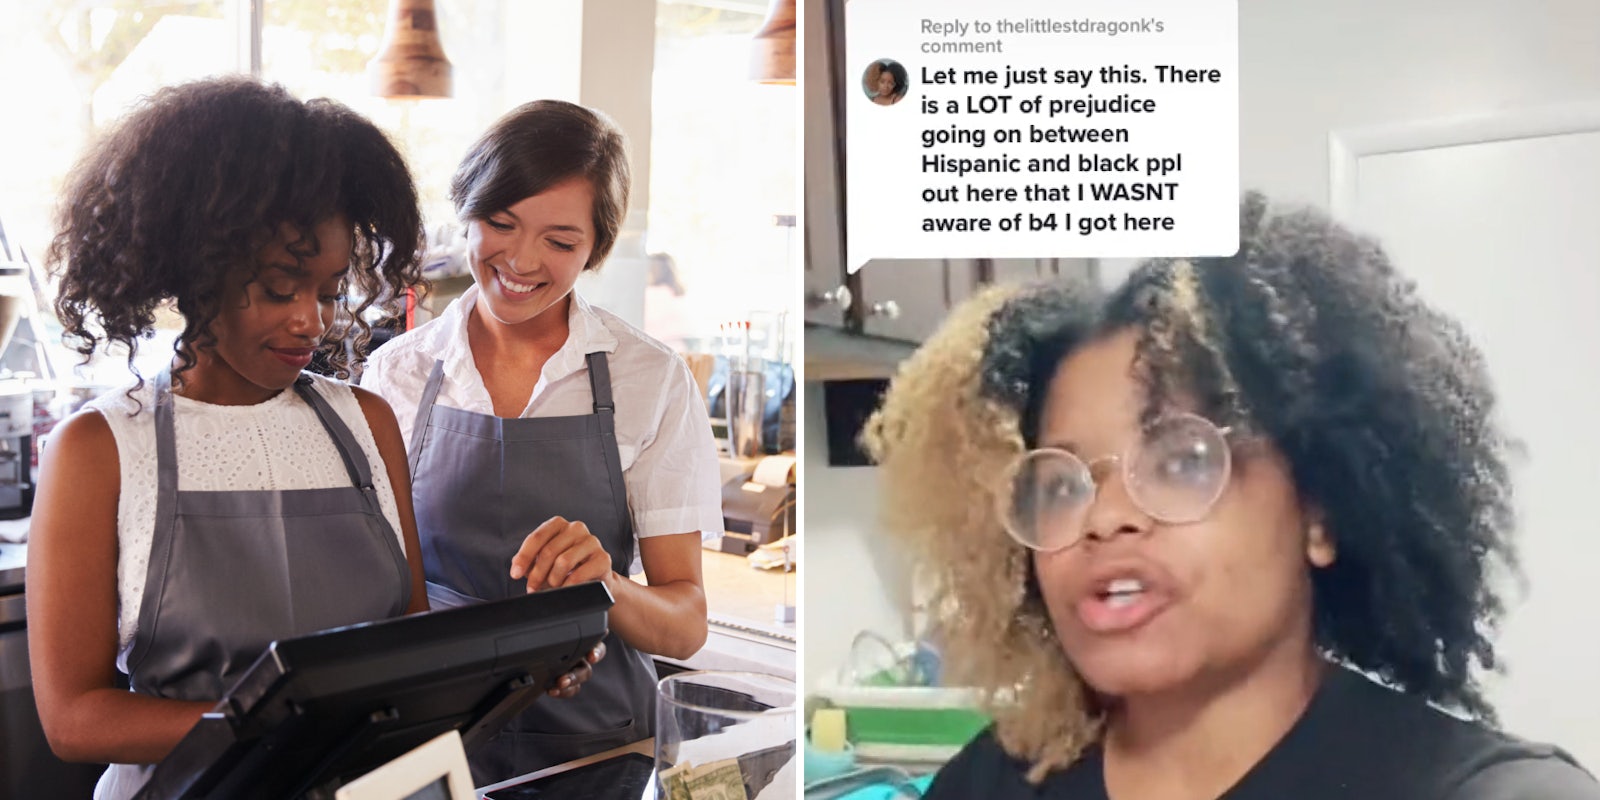 Two women at cash register (l) Woman talking caption 'Let me just say thus. There is a LOT of prejudice going on between Hispanic and black people out here that I WASNT aware of b4 I got here' (r)